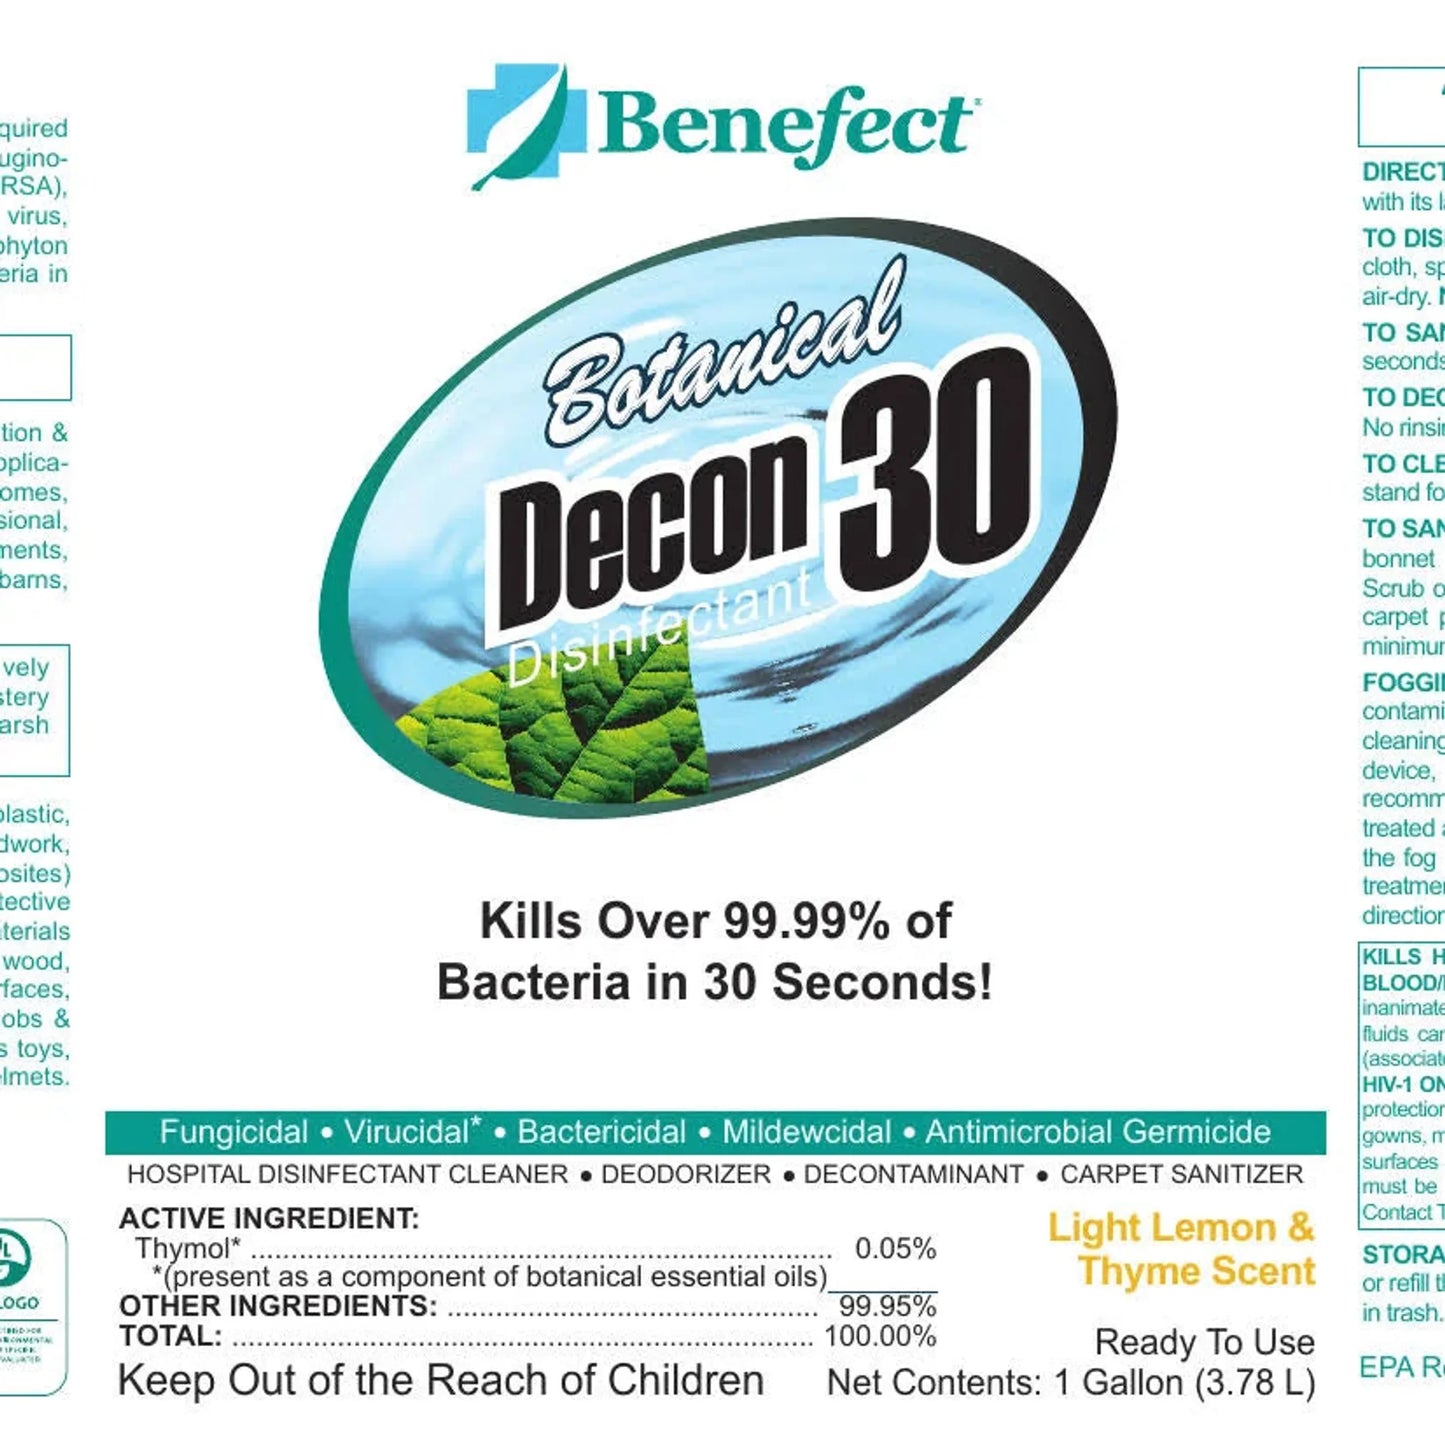 Benefect Botanical Decon 30, Disinfectant Cleaner (55 gal) Misc